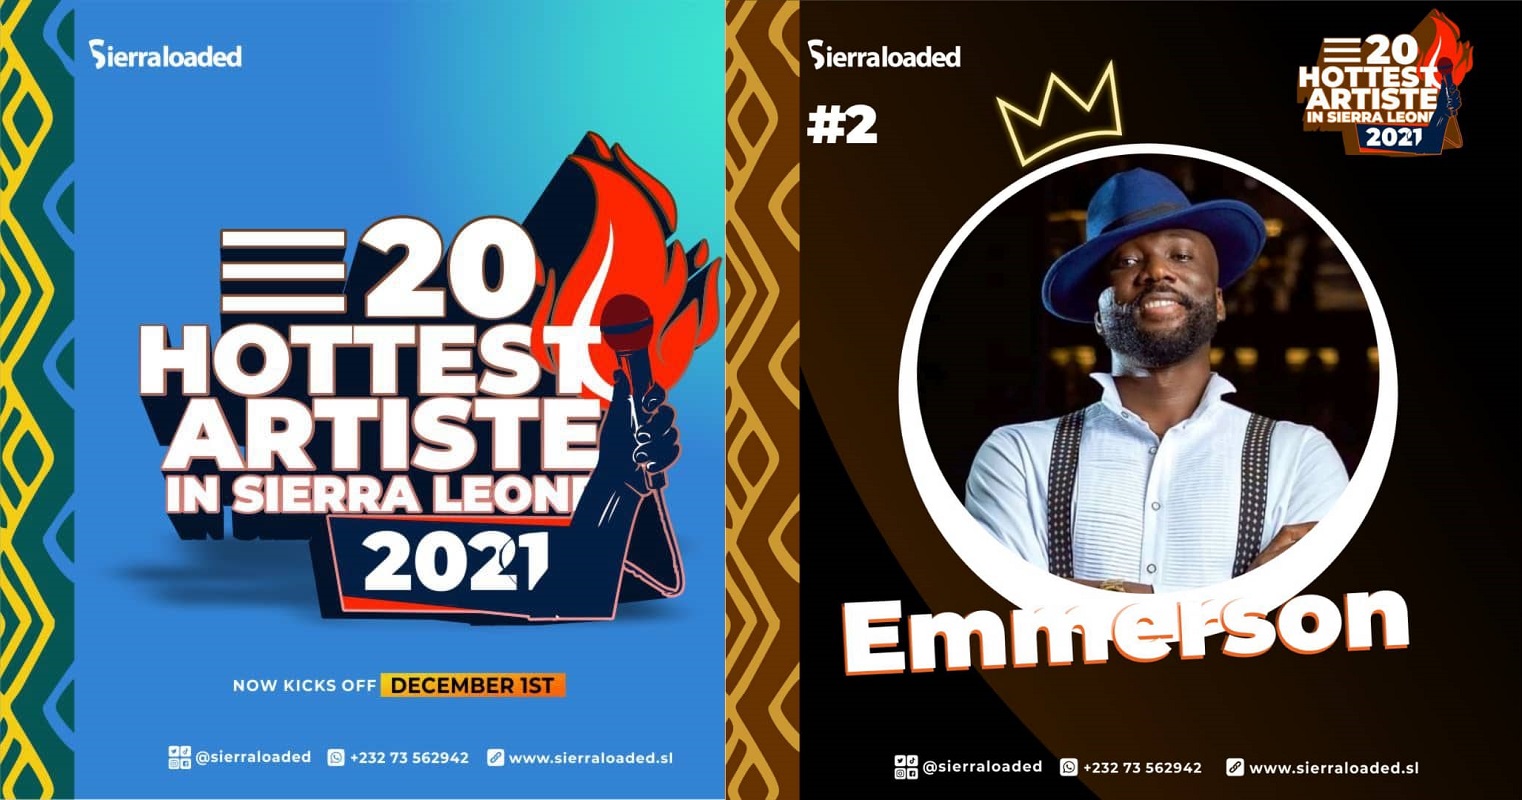 The 20 Hottest Artistes in Sierra Leone 2021: Emmerson – #2